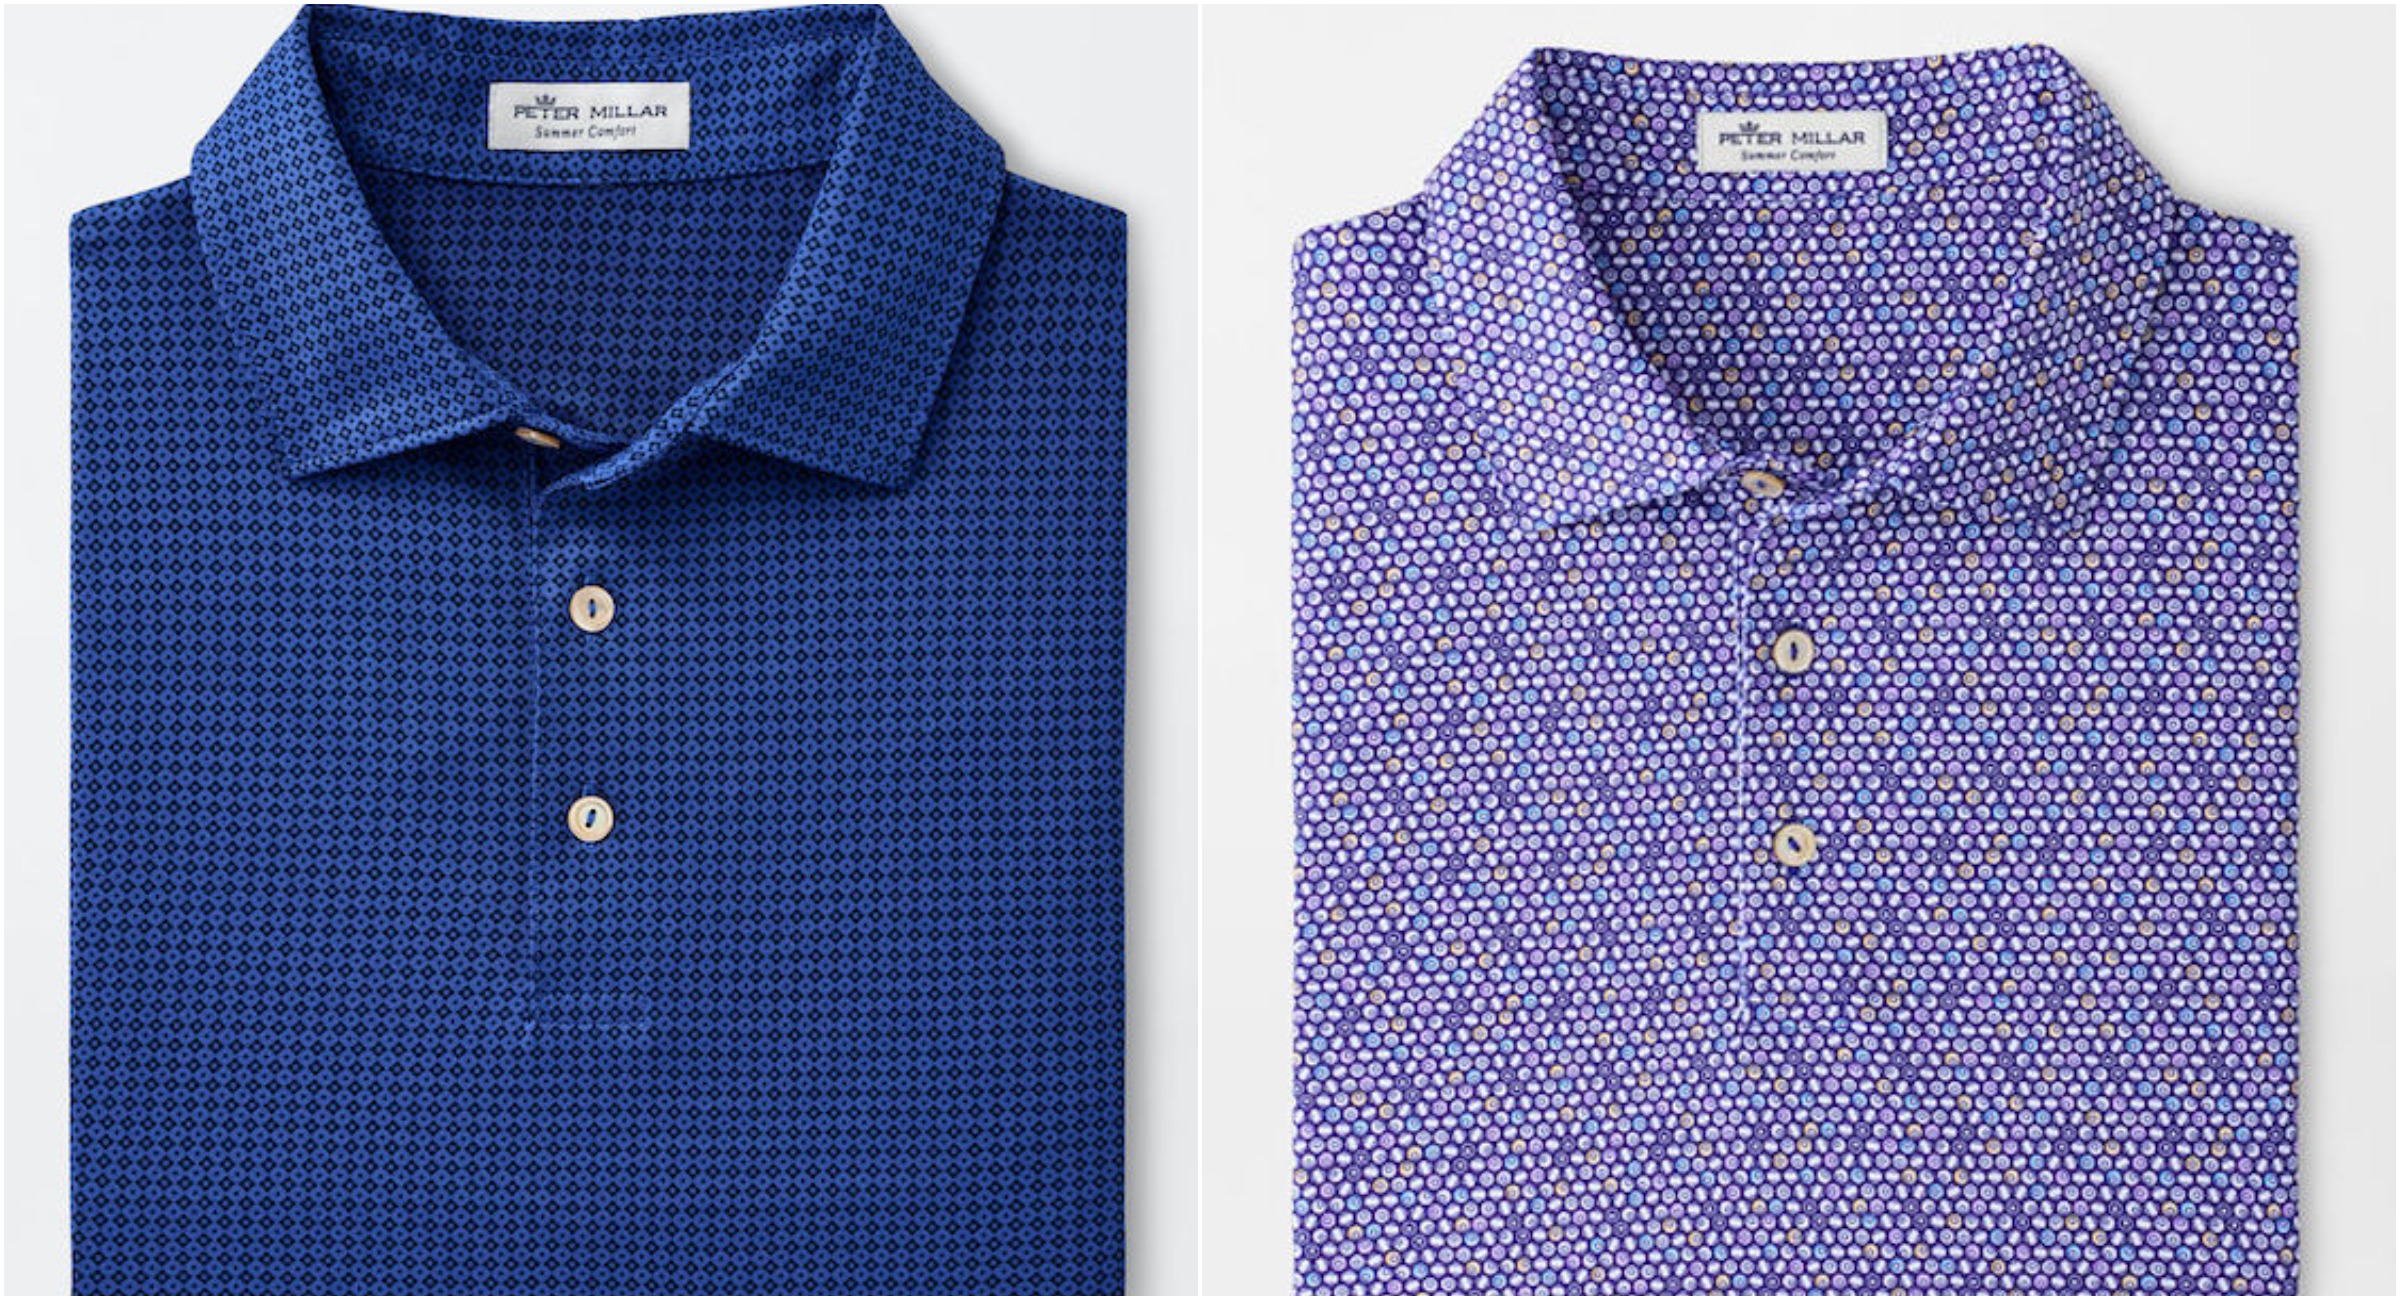 Our FAVOURITE Peter Millar golf polo shirts for SUMMER 2021 | GolfMagic